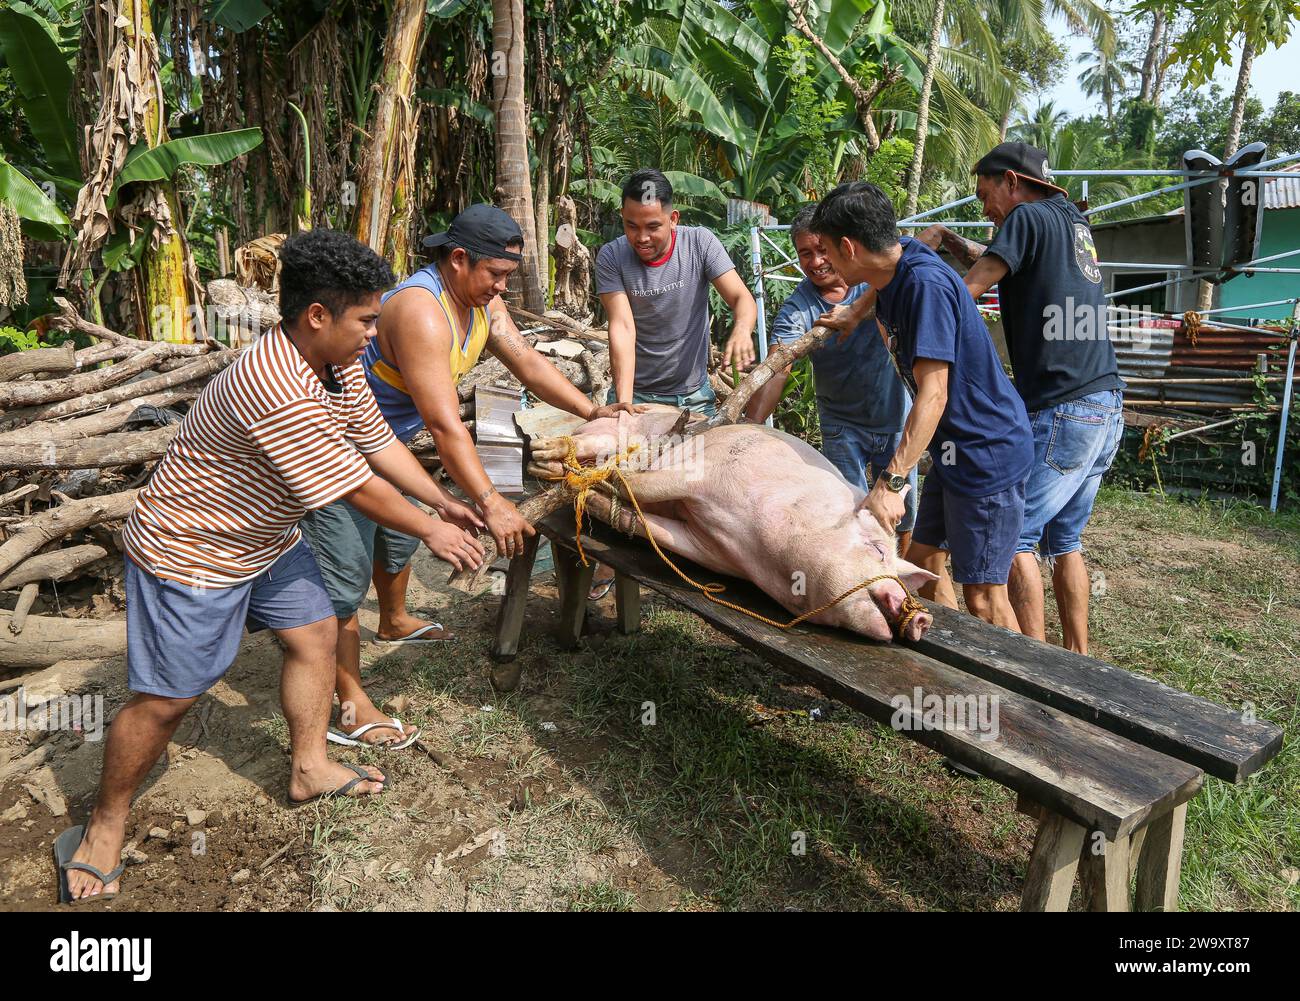 San Jose del Monte, Philippines. December 31, 2023: Traditional pig slaughtering for New Year's Eve celebrations amidst palm trees. At the northeast portion of over-urbanized Manila, the Philippine rural life is regaining its rights and home-made swine slaughter is a common practice, far from industrial standards or animal welfare. Full of superstitions (no chicken/fish), Filipino families will have to wait midnight to gather for Media Noche, a festive loud dinner that lasts until morning and celebrate the end of world's longest Christmas and holiday season.Credit: Kevin Izorce/Alamy Live News Stock Photo